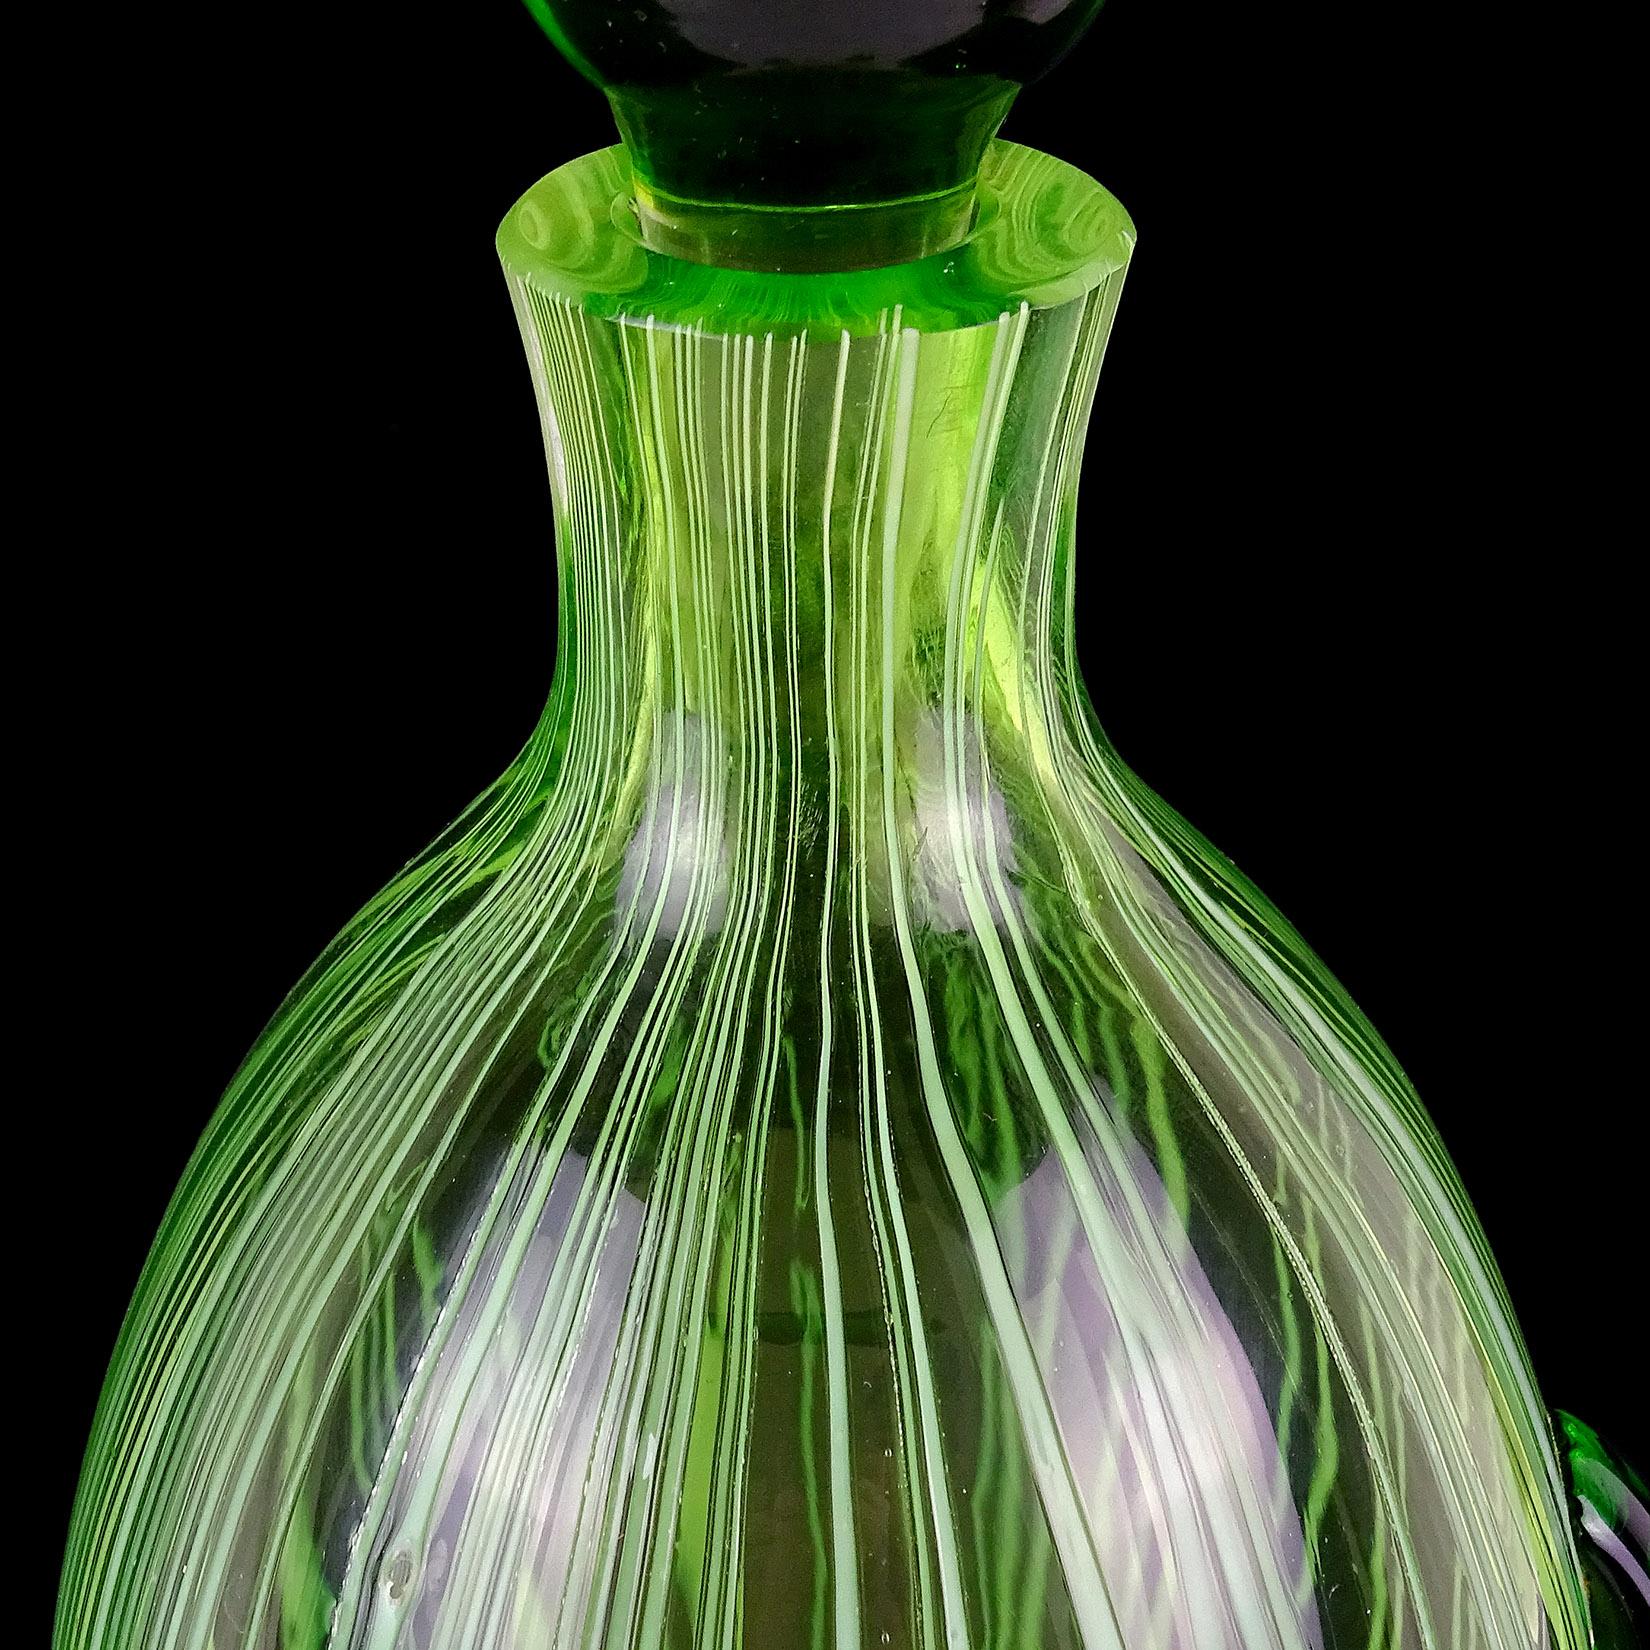 Hand-Crafted Fratelli Toso Murano Midcentury Green Clown Face Italian Art Glass Decanter